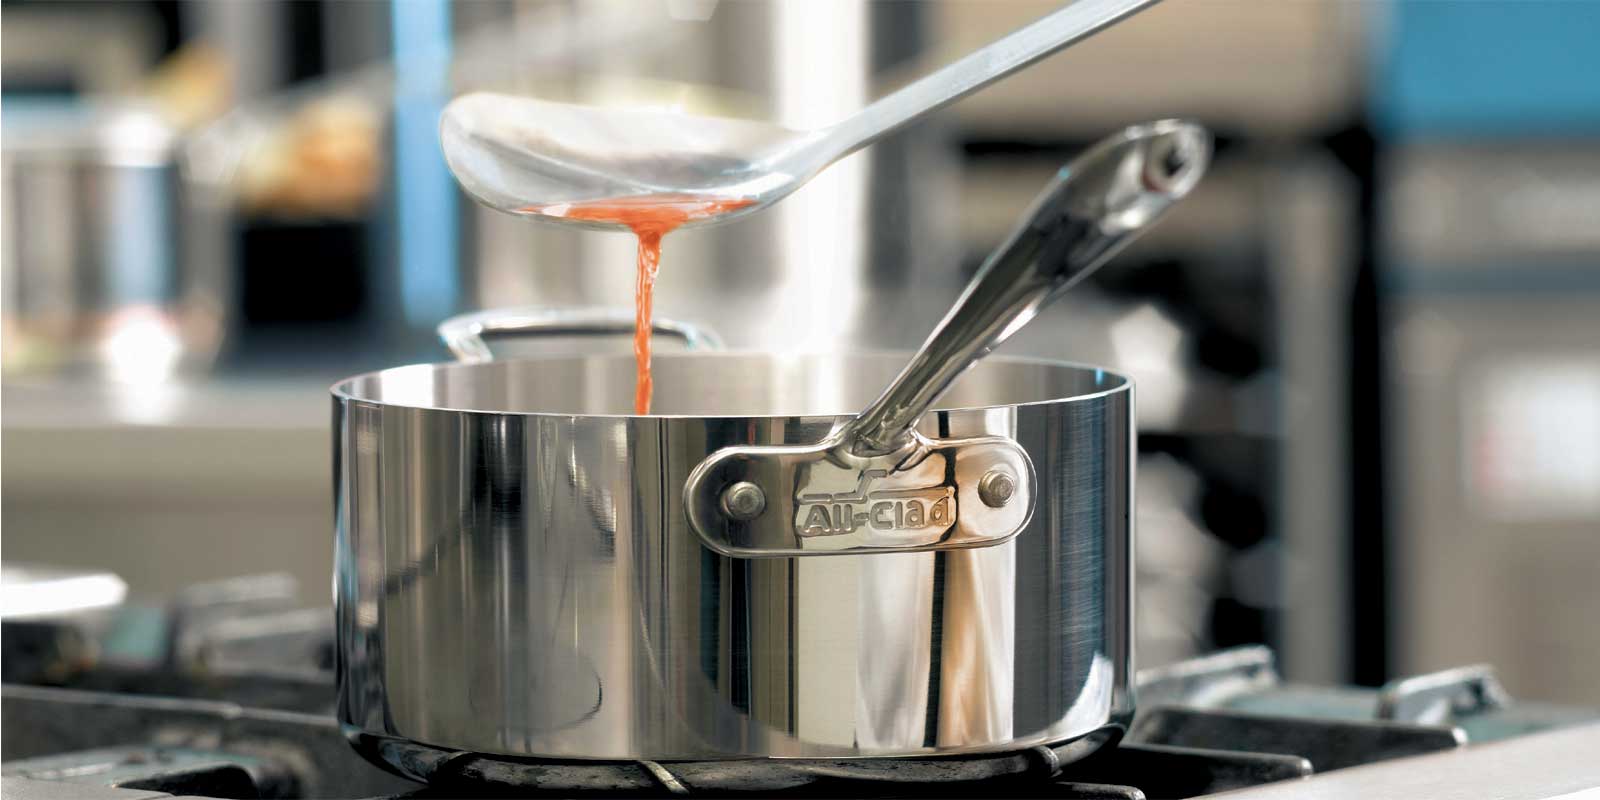 All-Clad Pots and Pans - Stainless® This Stainless® series has a three-layer metal compound with an aluminum core that maximizes thermal conductivity and heat distribution. The outer layer is made of stainless steel for cleaning and durability.

- Suitable for all types of stoves, ideal for induction and gas
- very good heat distribution
- very fast heating
- low weight
- minimalist design
- large assortment